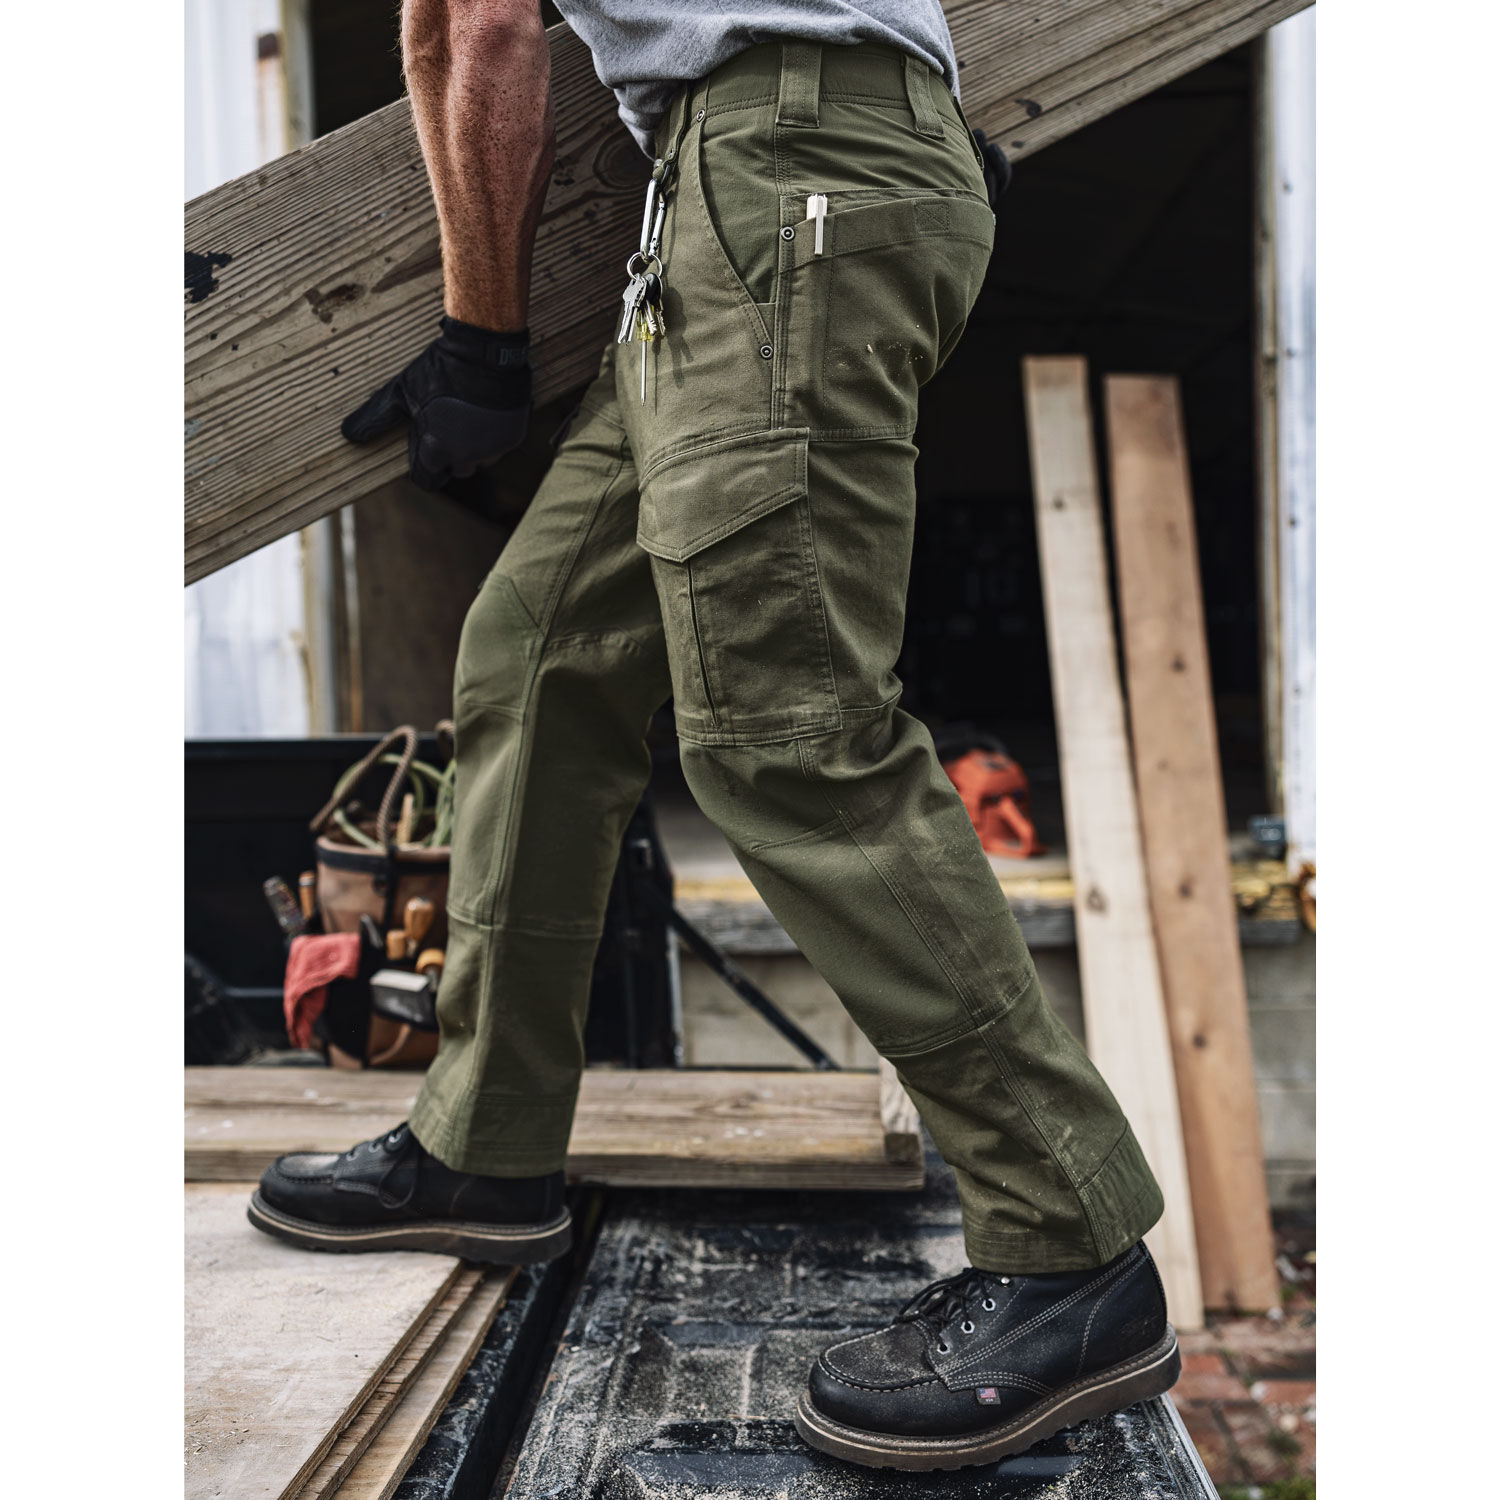 Cotton Cargo Jogger Pants for Tall Men | American Tall